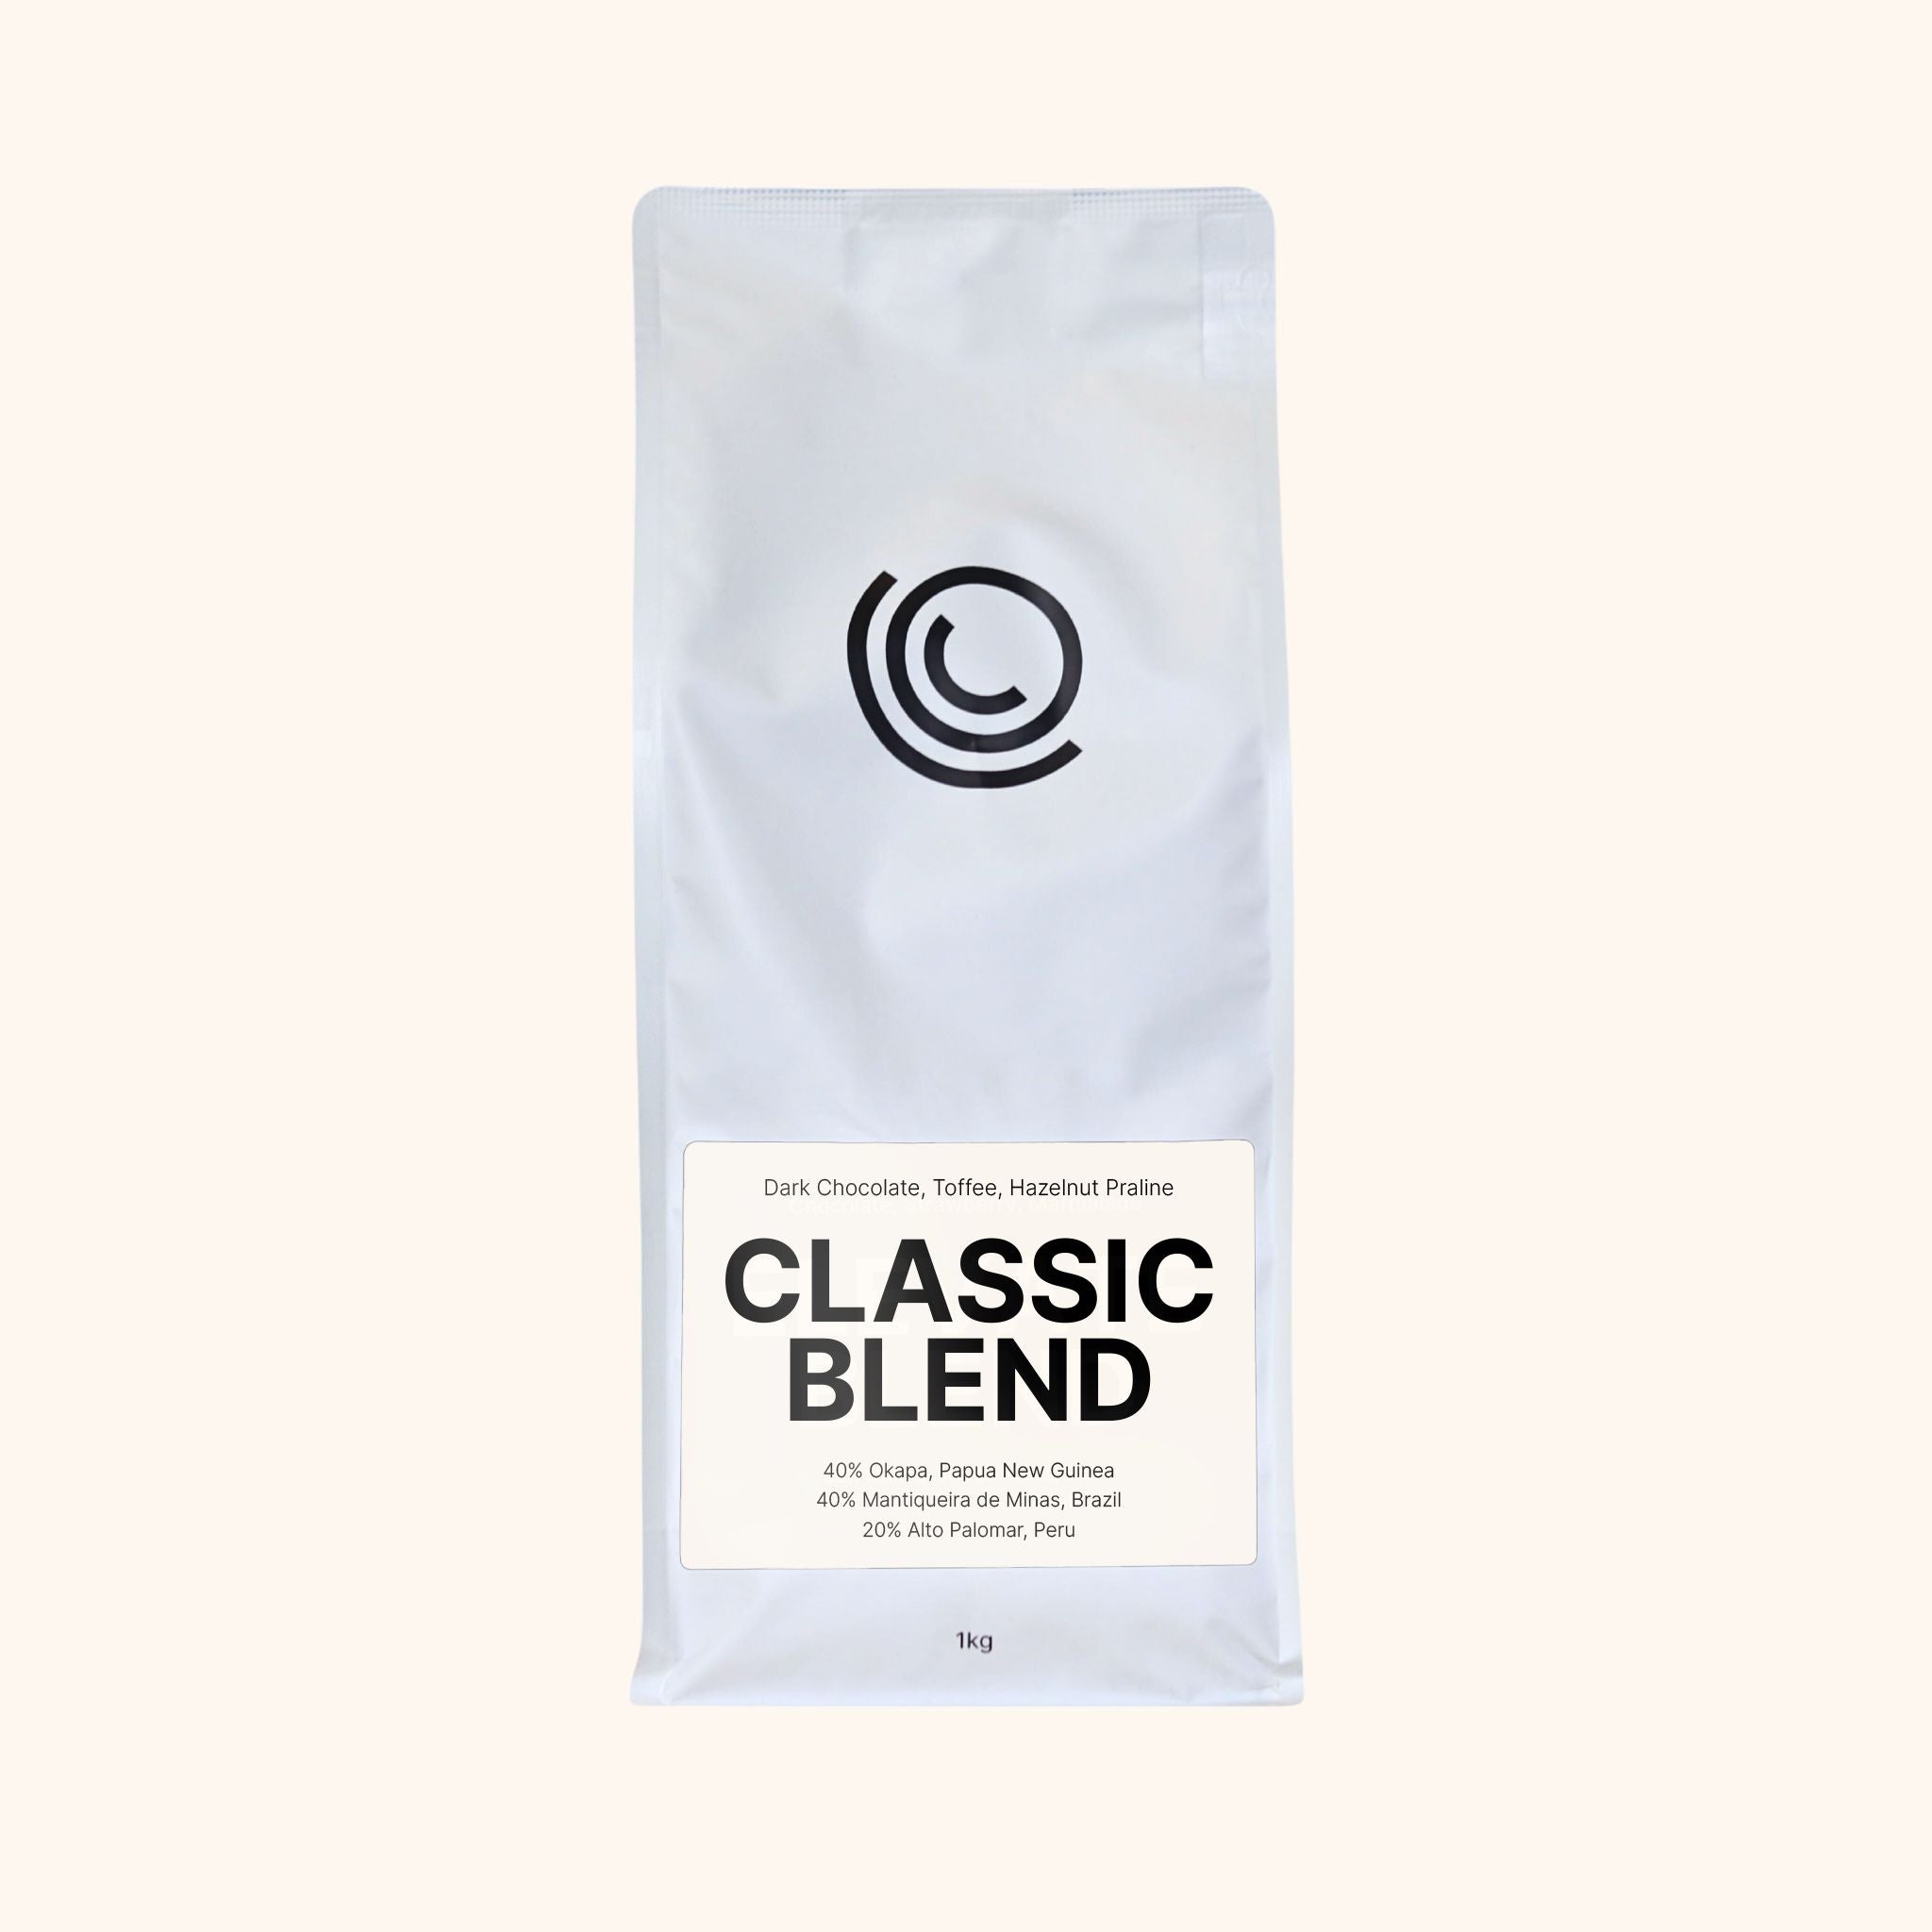 Coffee on Cue 1kg bag of Classic Blend